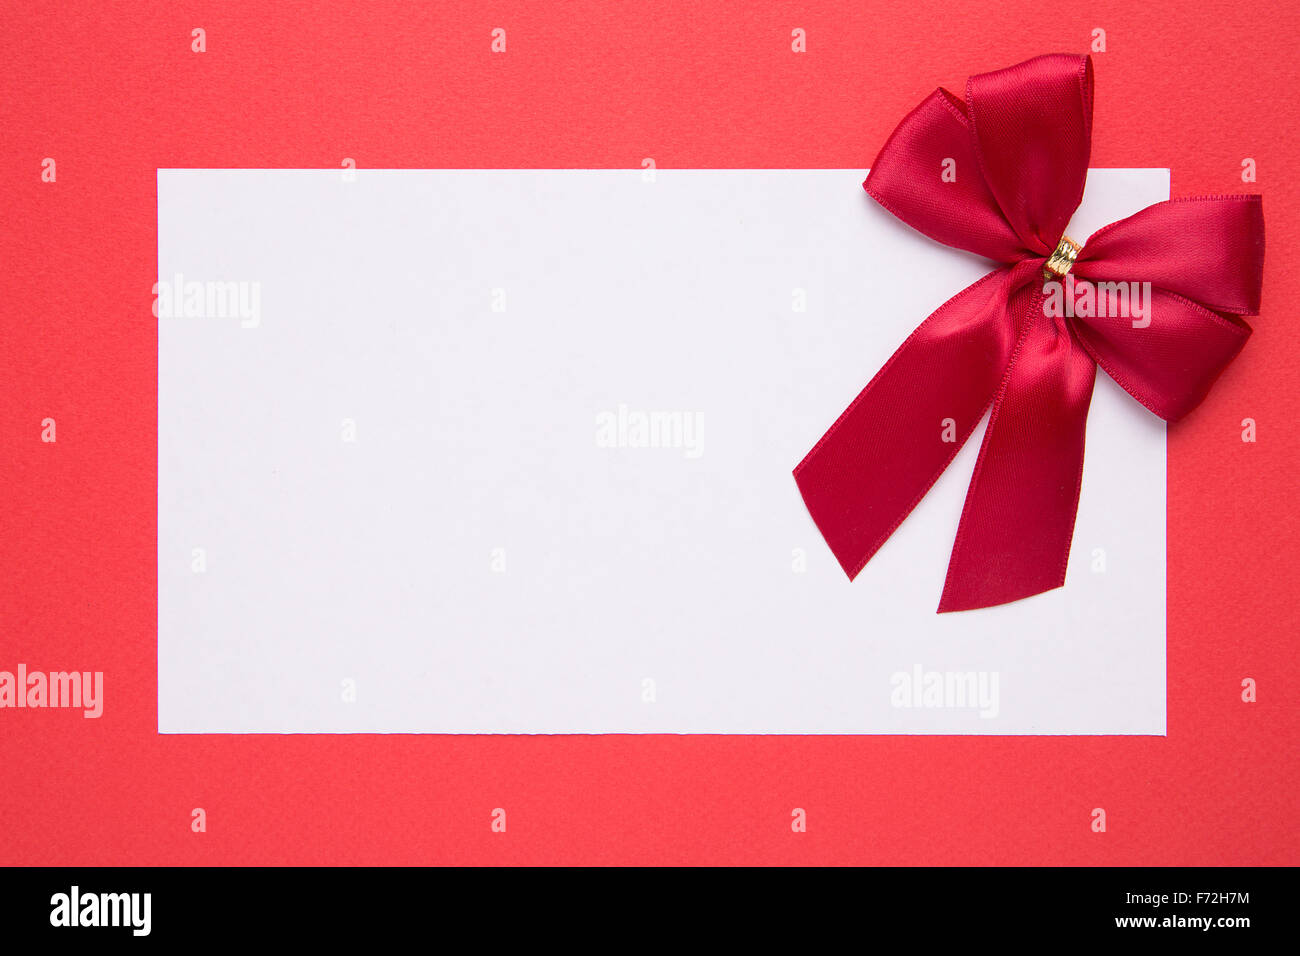 Blank Christmas card or invitation with bow on red background Stock Photo